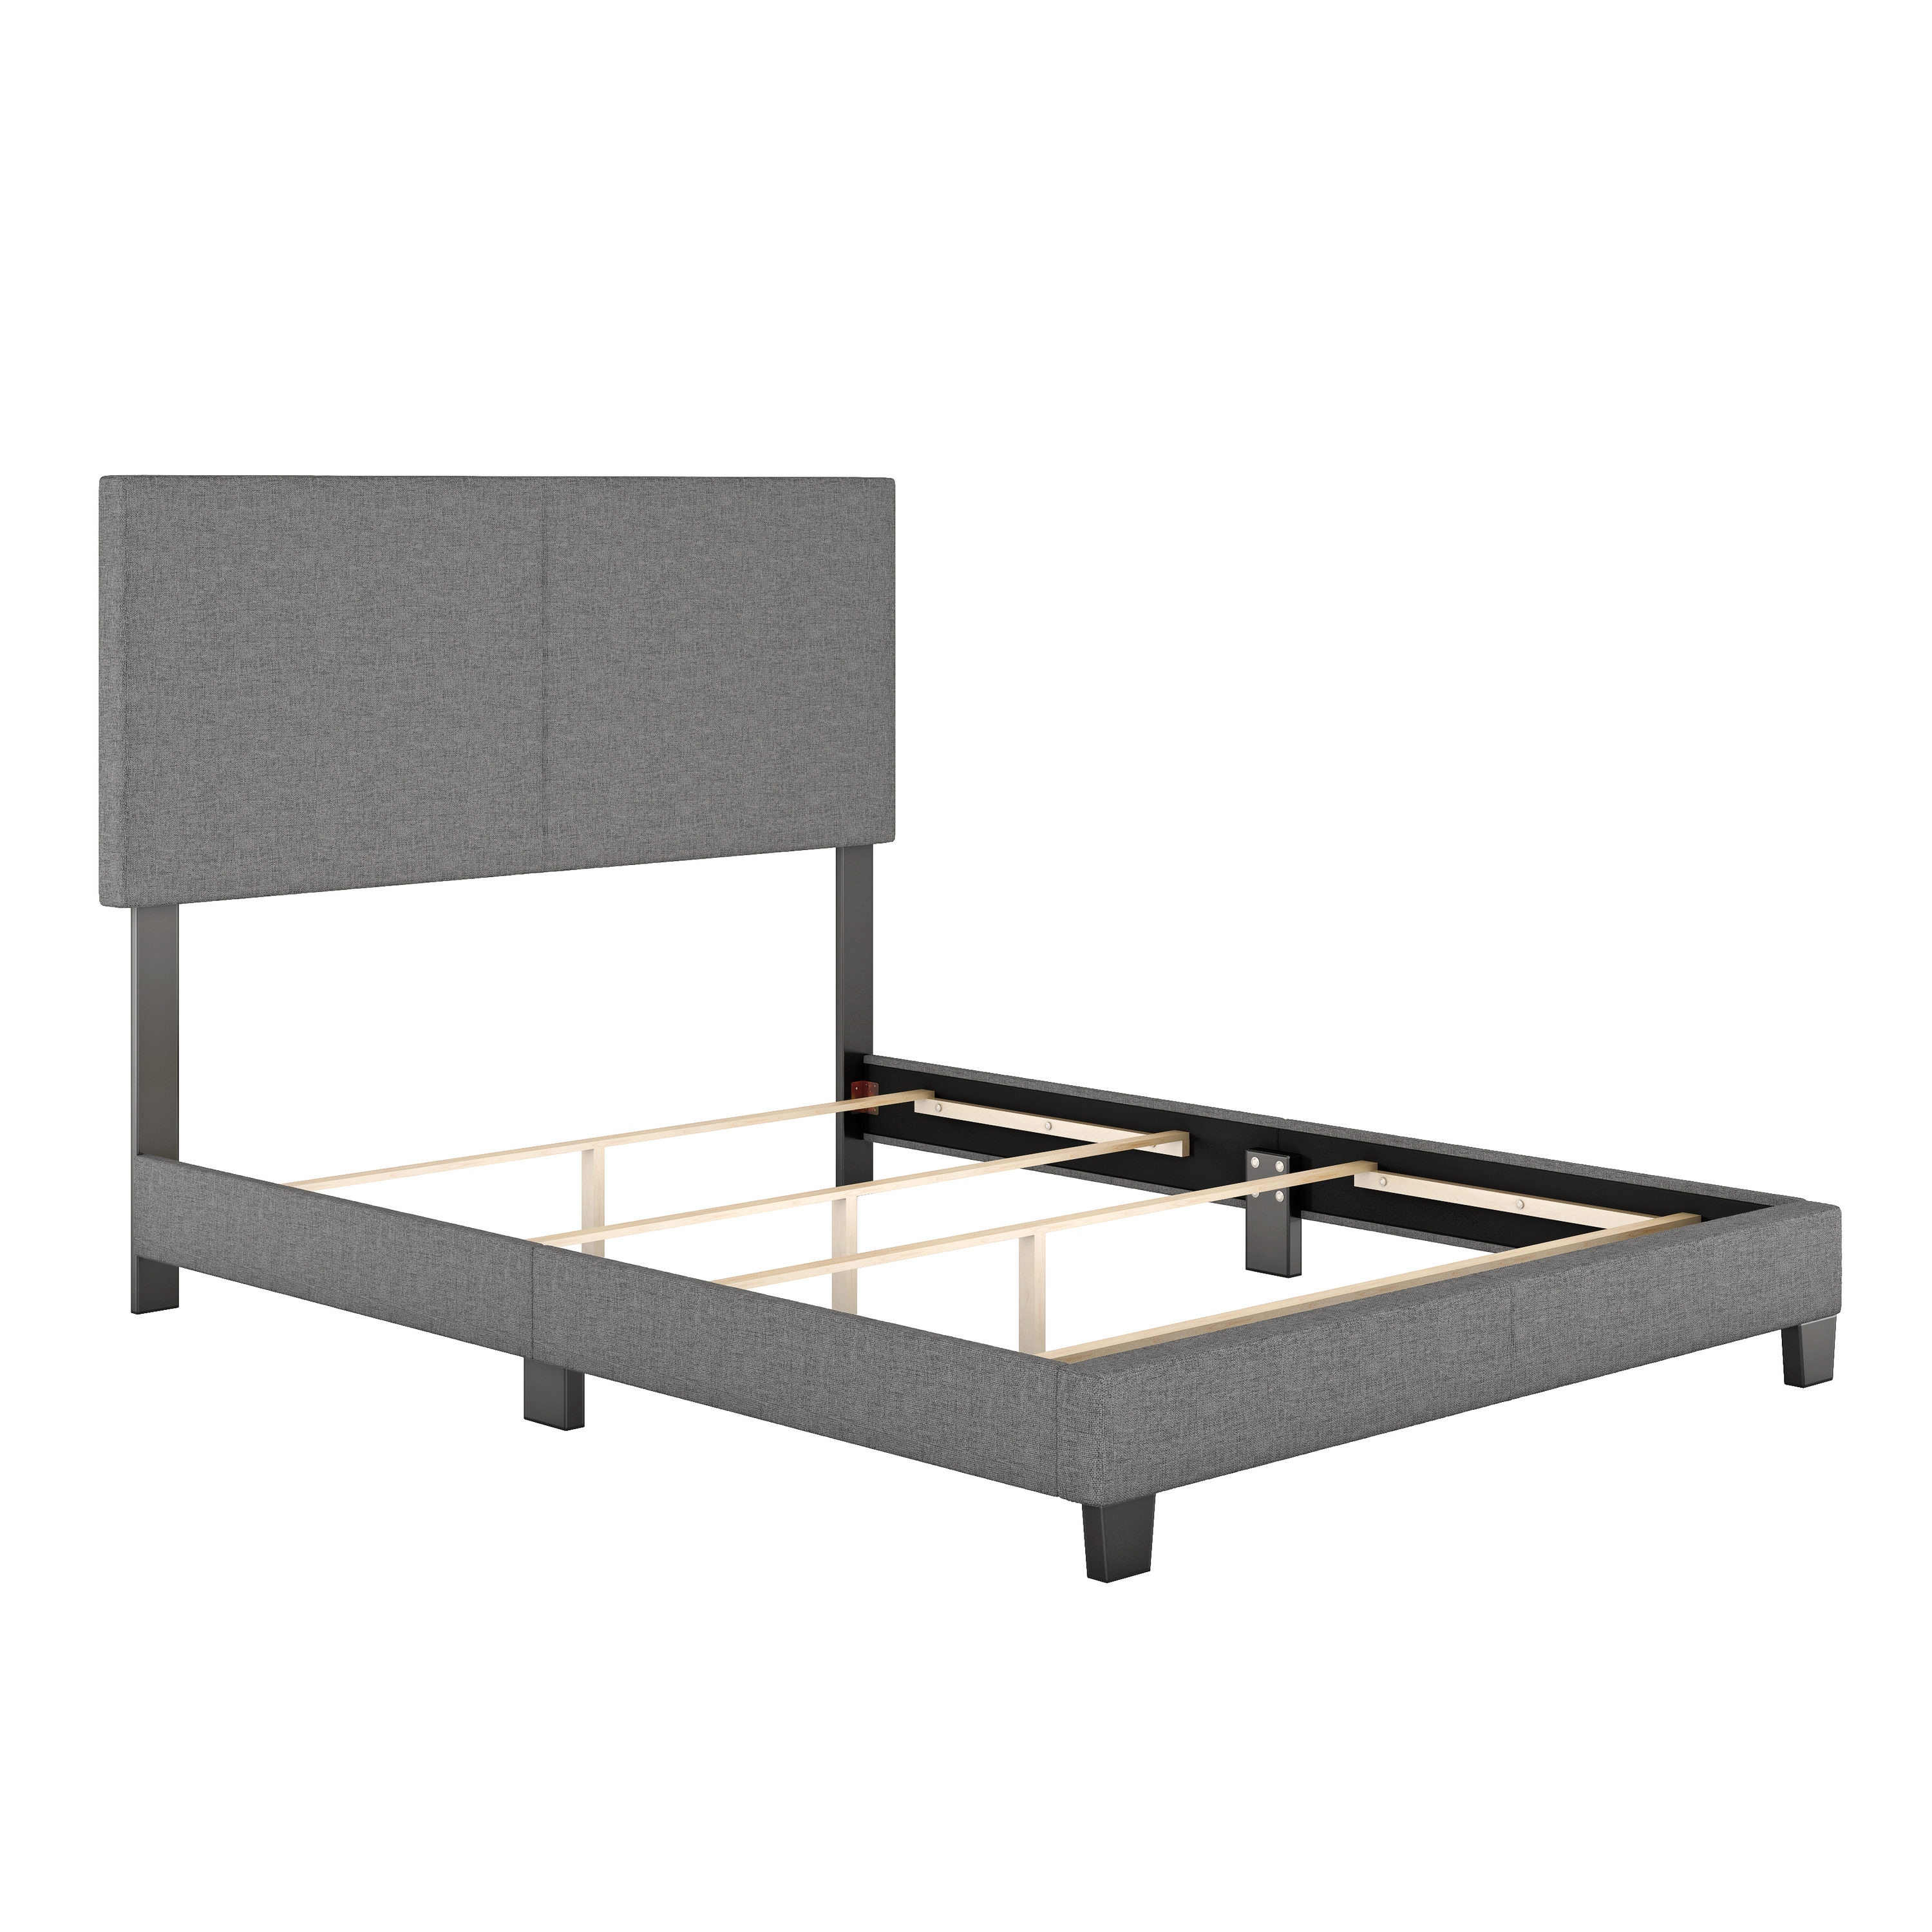 PerformaRest Morgan Grey Full Faux Leather Bed Frame in the Beds ...